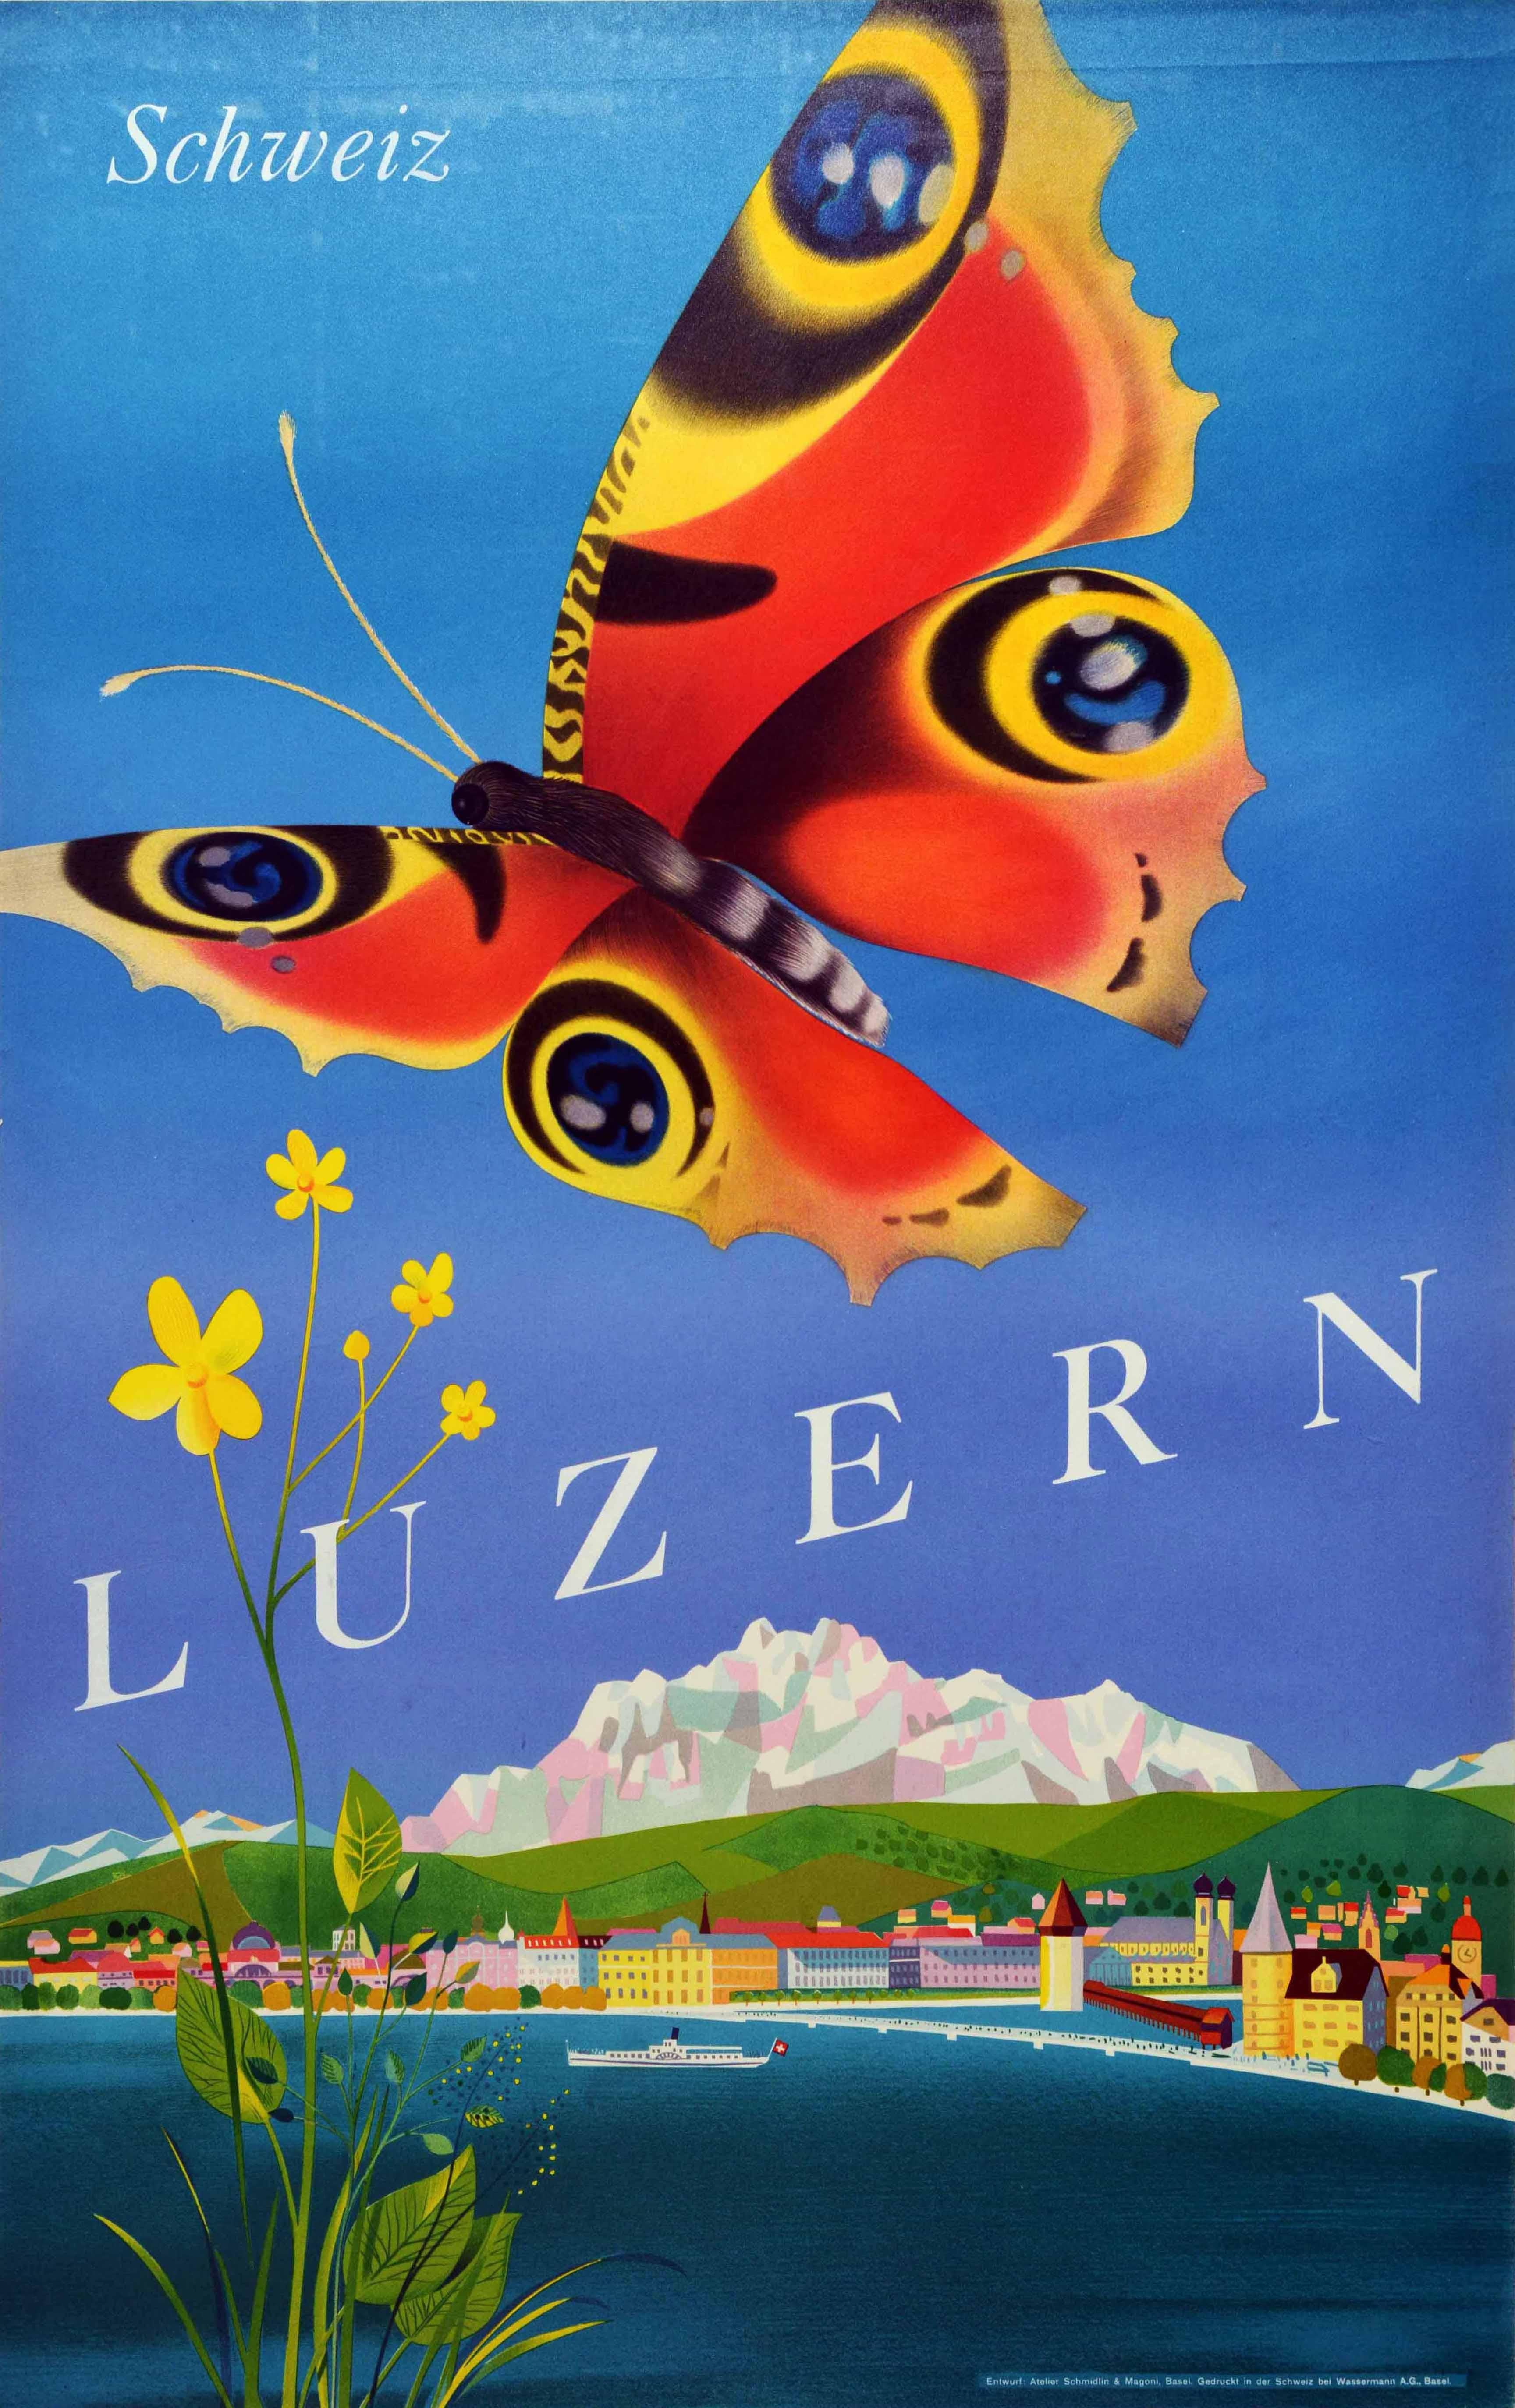 Original vintage travel poster promoting Lucerne in Switzerland featuring a colourful design of buildings on a waterfront, with churches, green hills and the Swiss Alps mountains overlooking a ship on Lucerne lake with a butterfly and a yellow